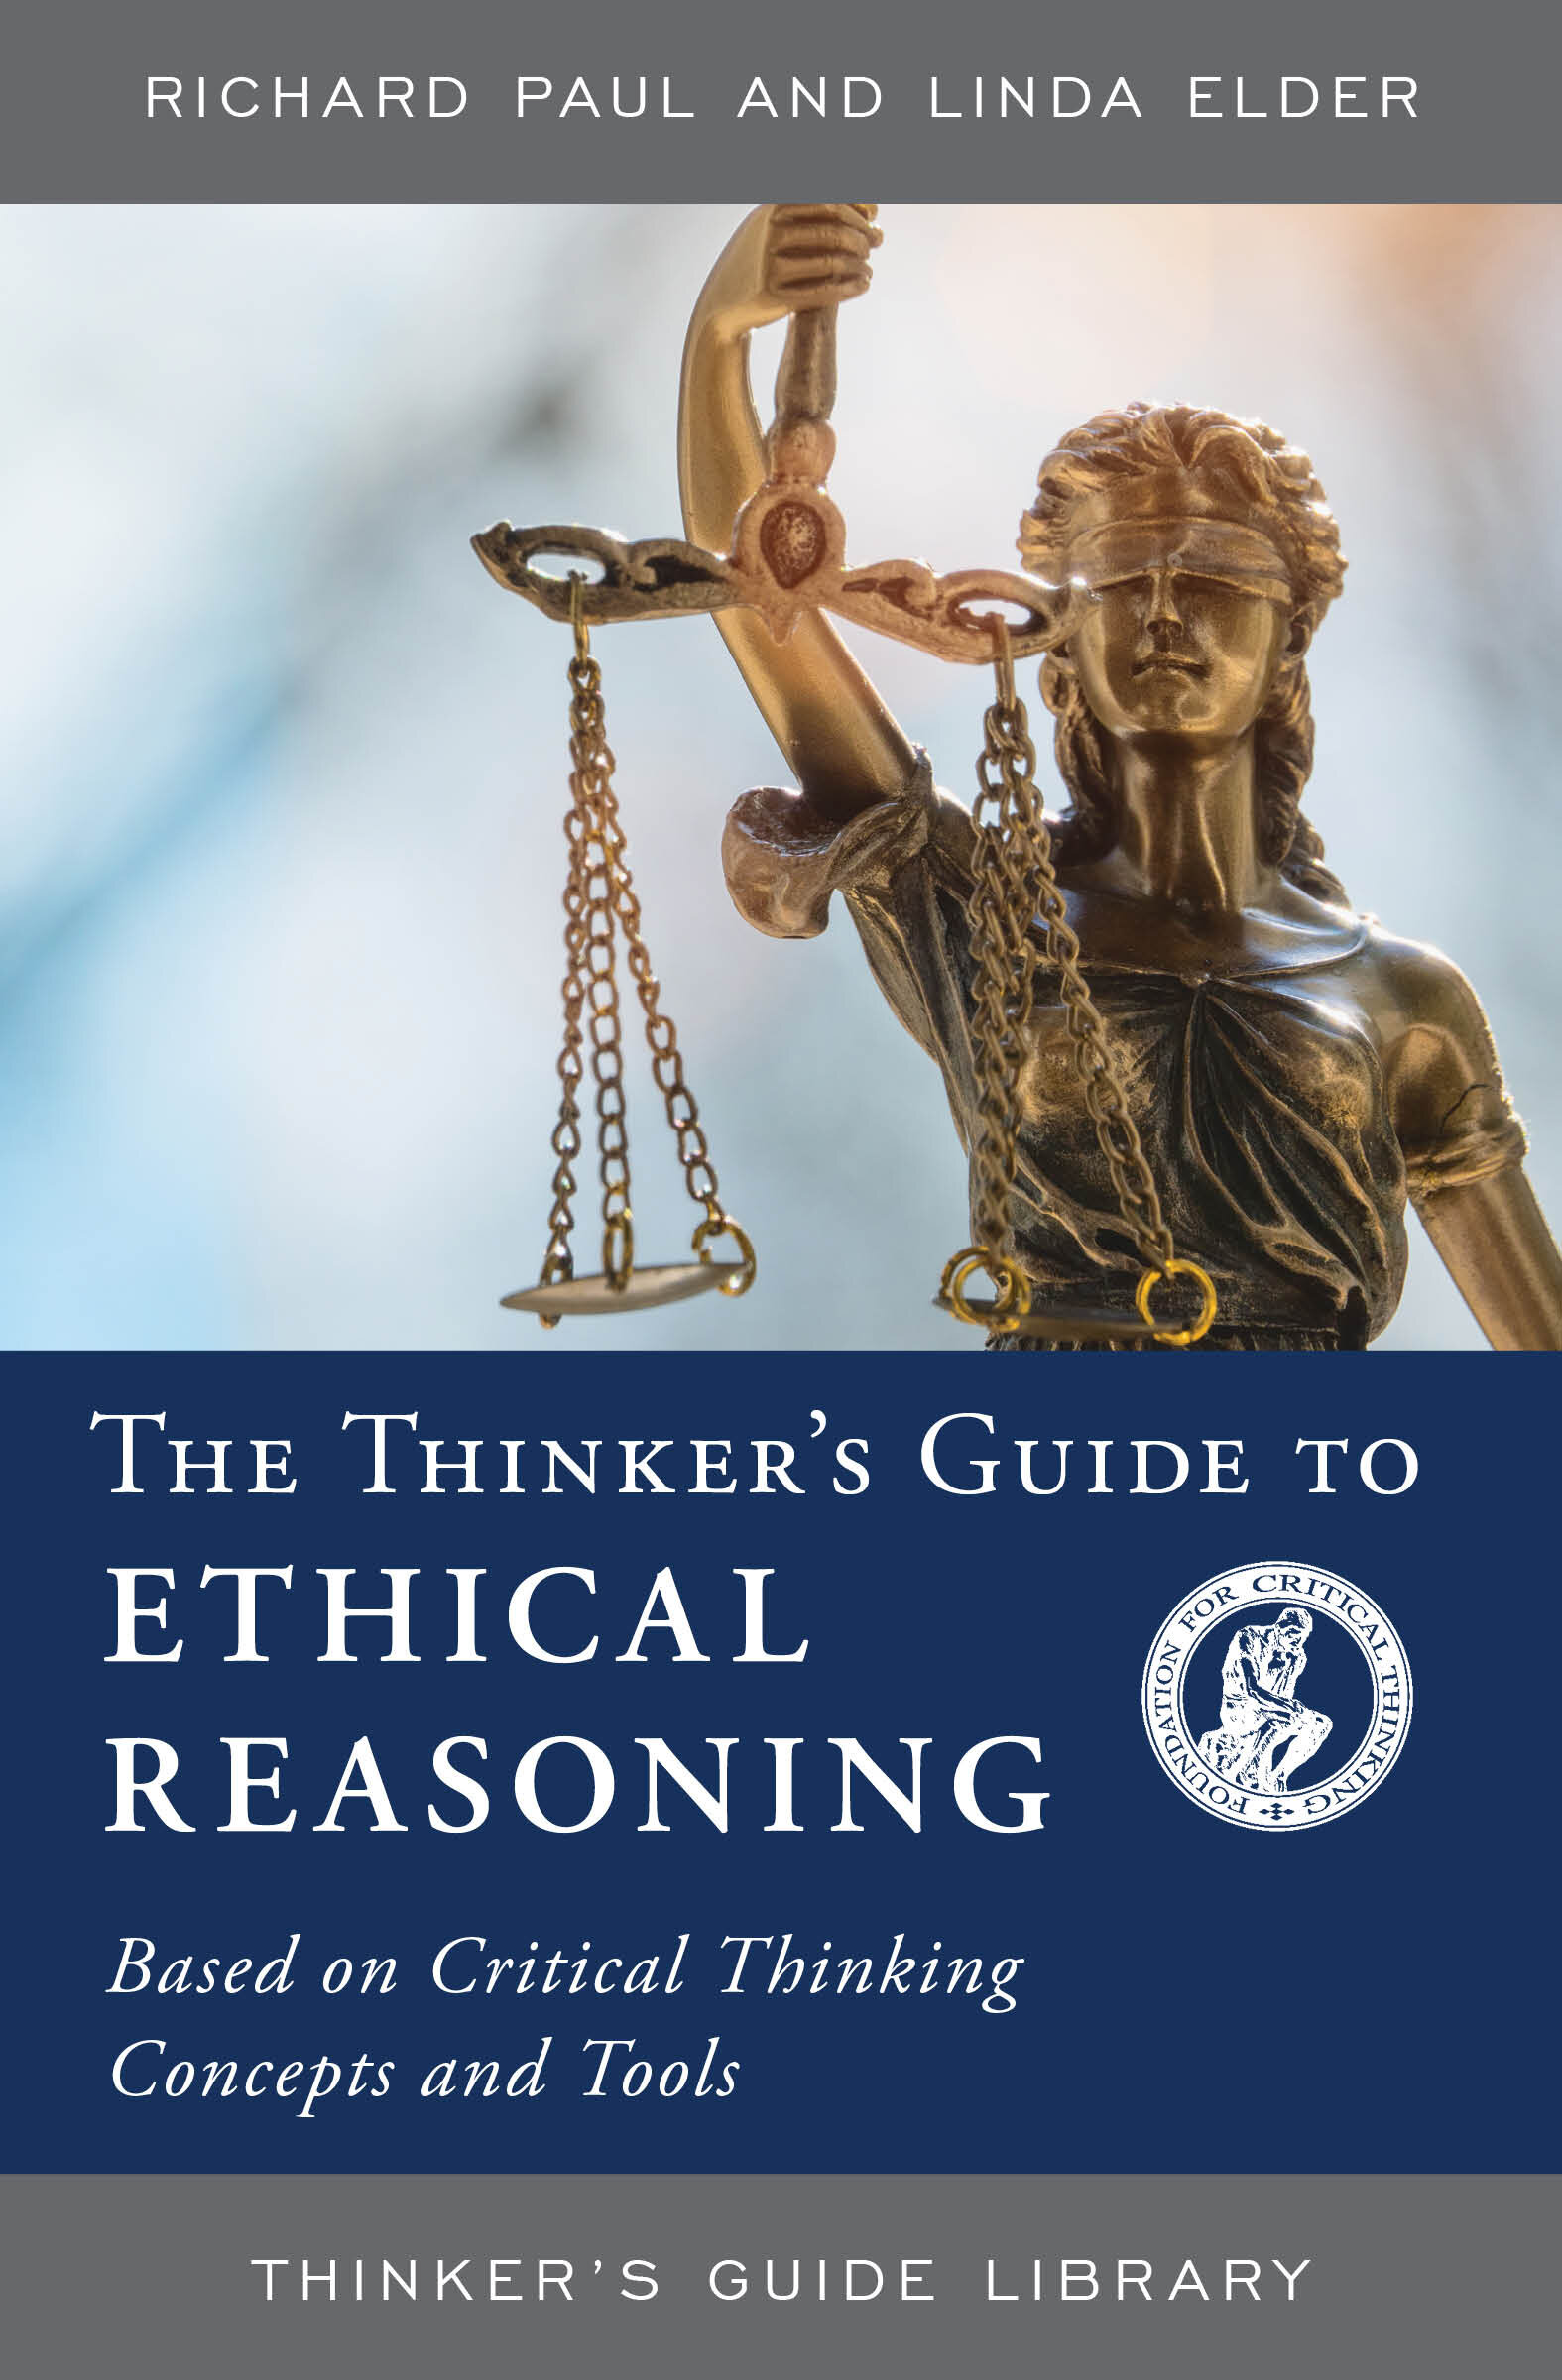 critical thinking and ethical reasoning are one and the same